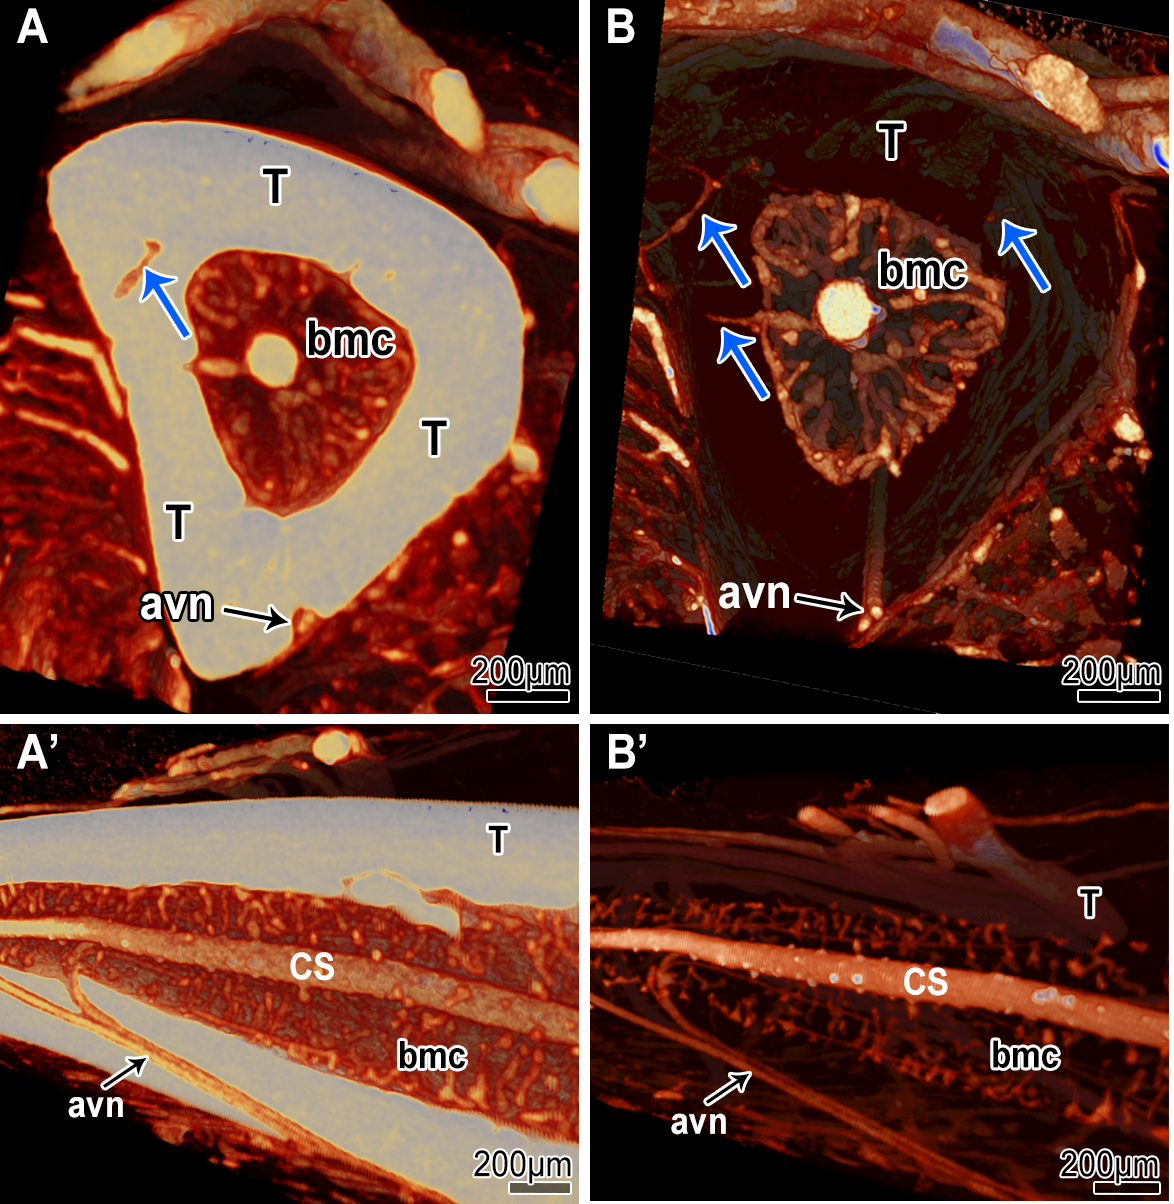 Figure 2: microangioCT-based visualization of the diaphysis of CB17SCID mice tibia before (A & A’) and after decalcification with 10% EDTA (B & B’). In A and A’ the tibia bone appears brighter and opaque due to higher X-ray absorption. In B and B’ the tibia bone appears transparent due to its lowered X-ray absorption after decalcification. Due to the decalcification, connecting vessels between the periosteal vessels and the vessels of the bone marrow cavity (bmc) are more easily detectable (blue arrows in A vs. B). The visualization of the vessels within the medullar cavity (central sinus (CS)) is also improved. At the external surface of the tibia, supplying arteries are visible (arteria et vena nutricia (avn)).